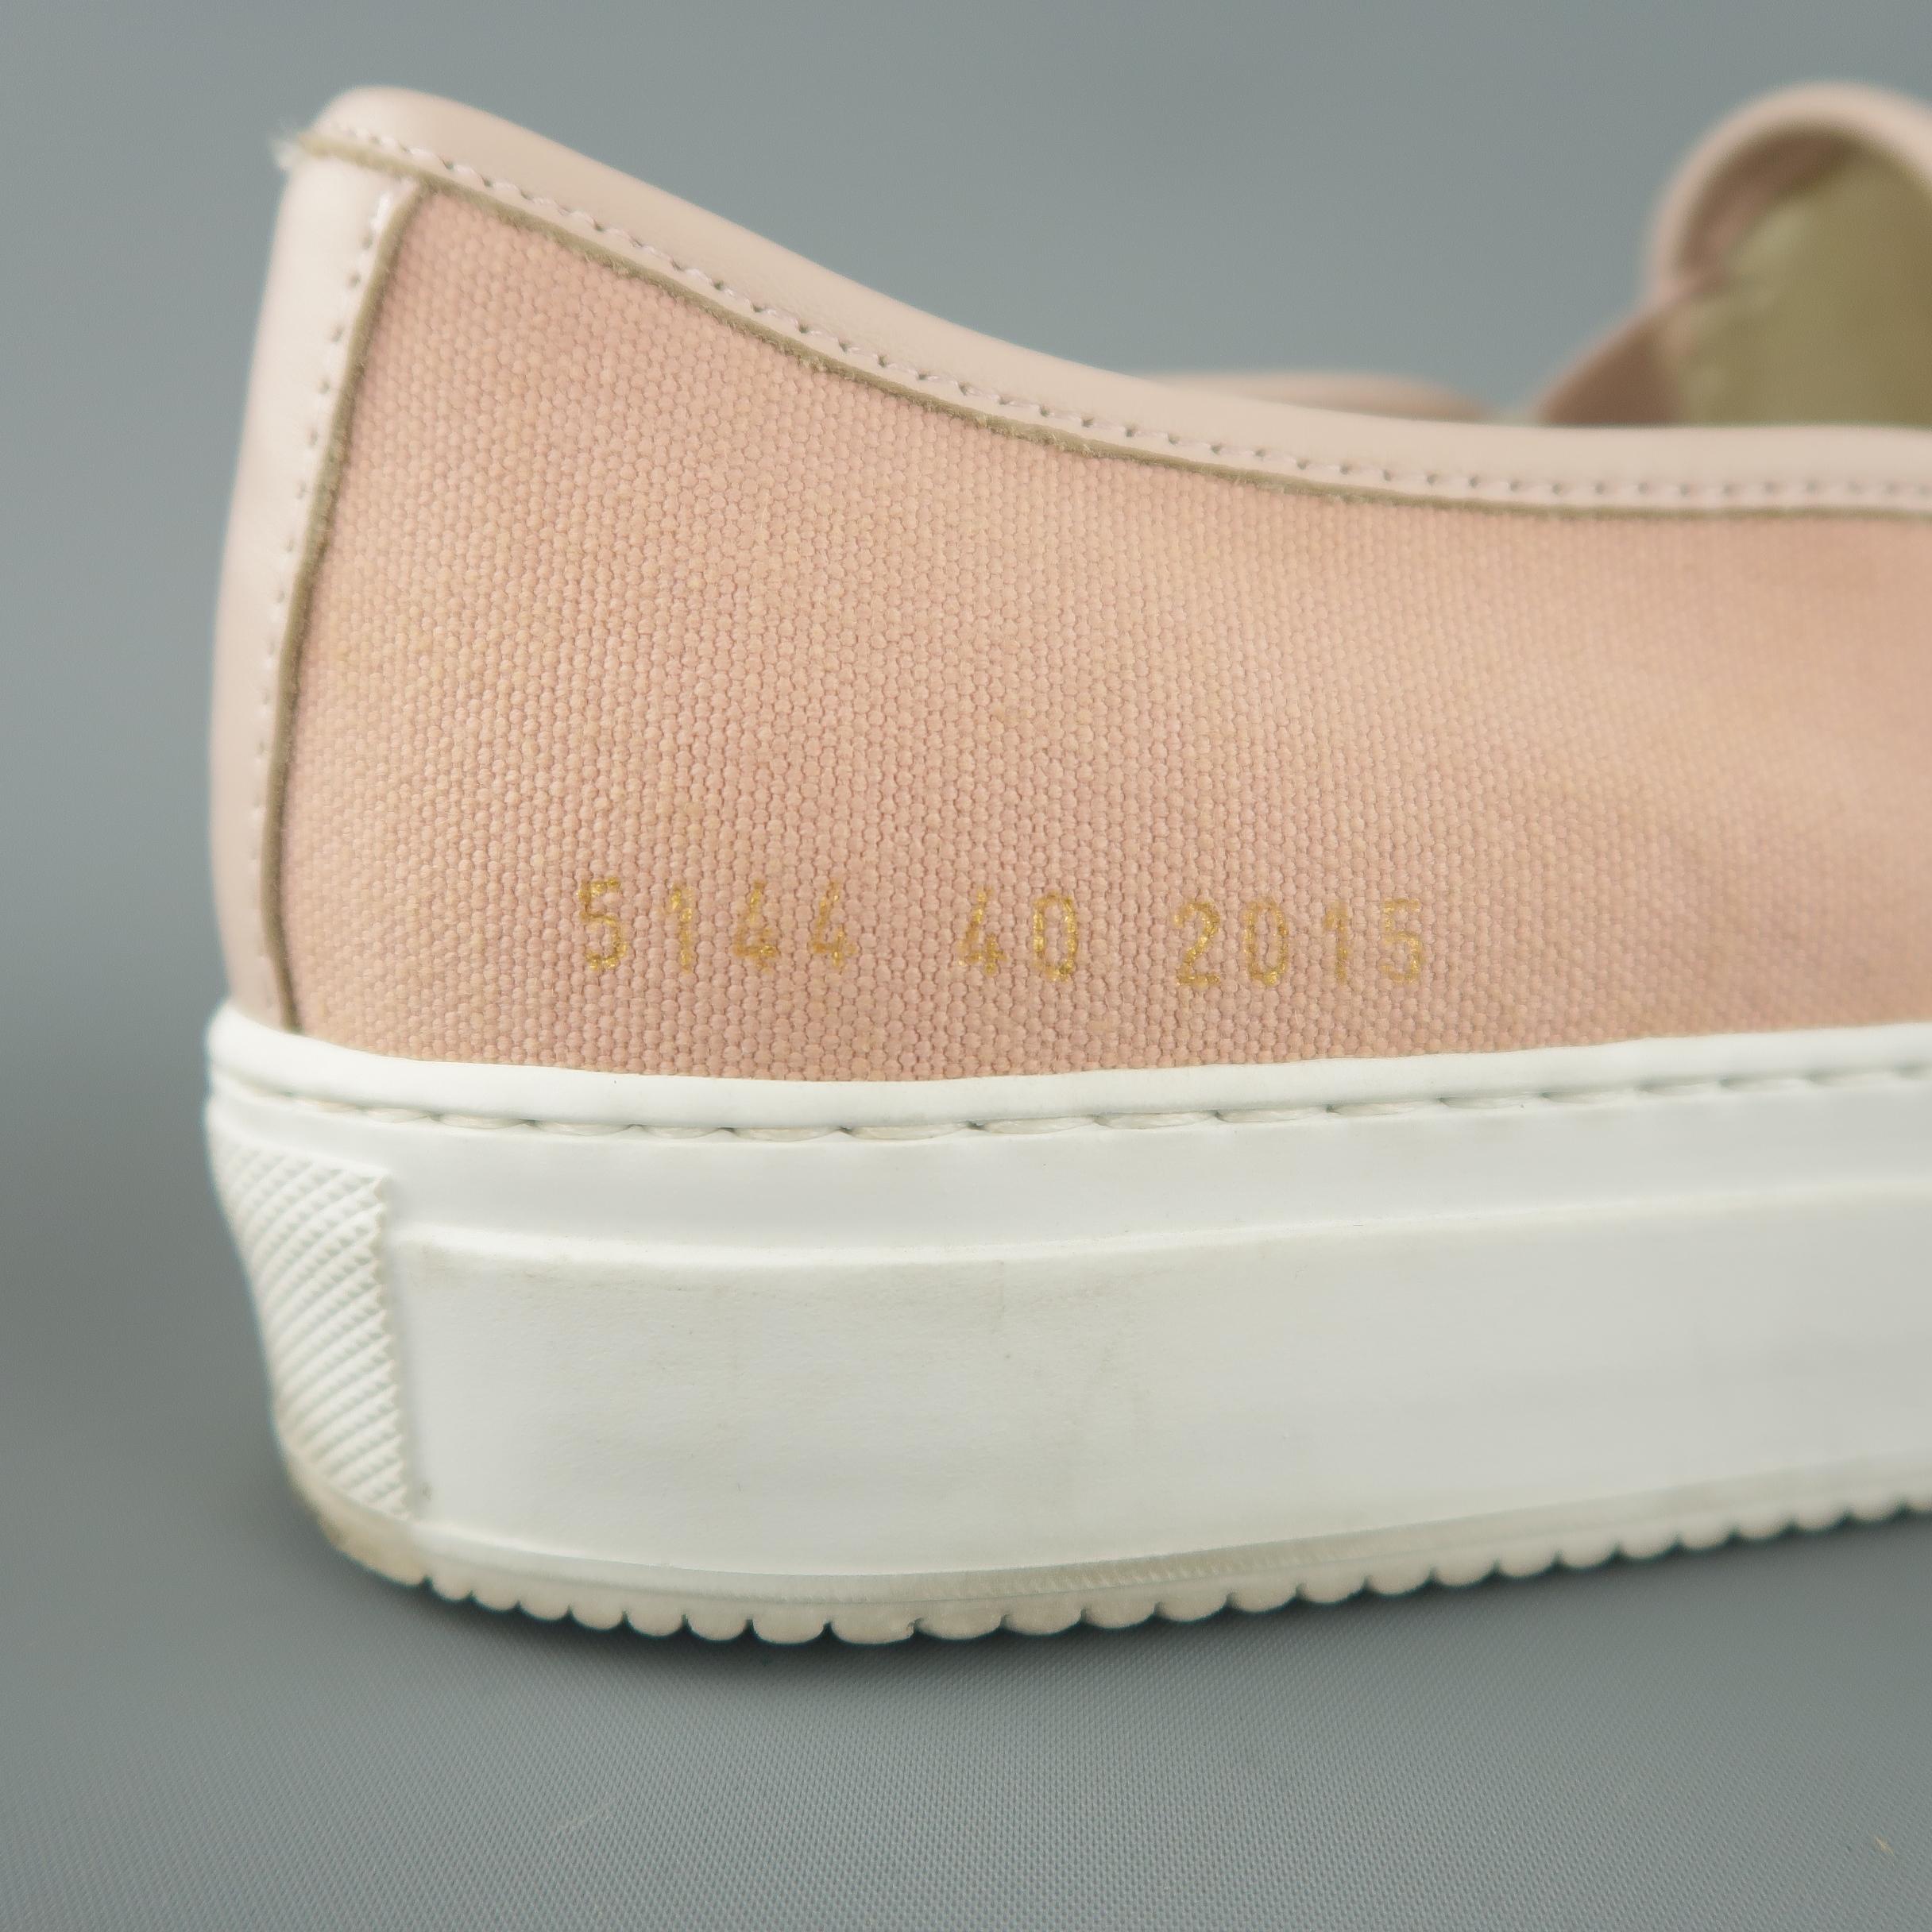 Men's COMMON PROJECTS Size 7 Rose Pink Canvas & Leather Slip On Sneakers